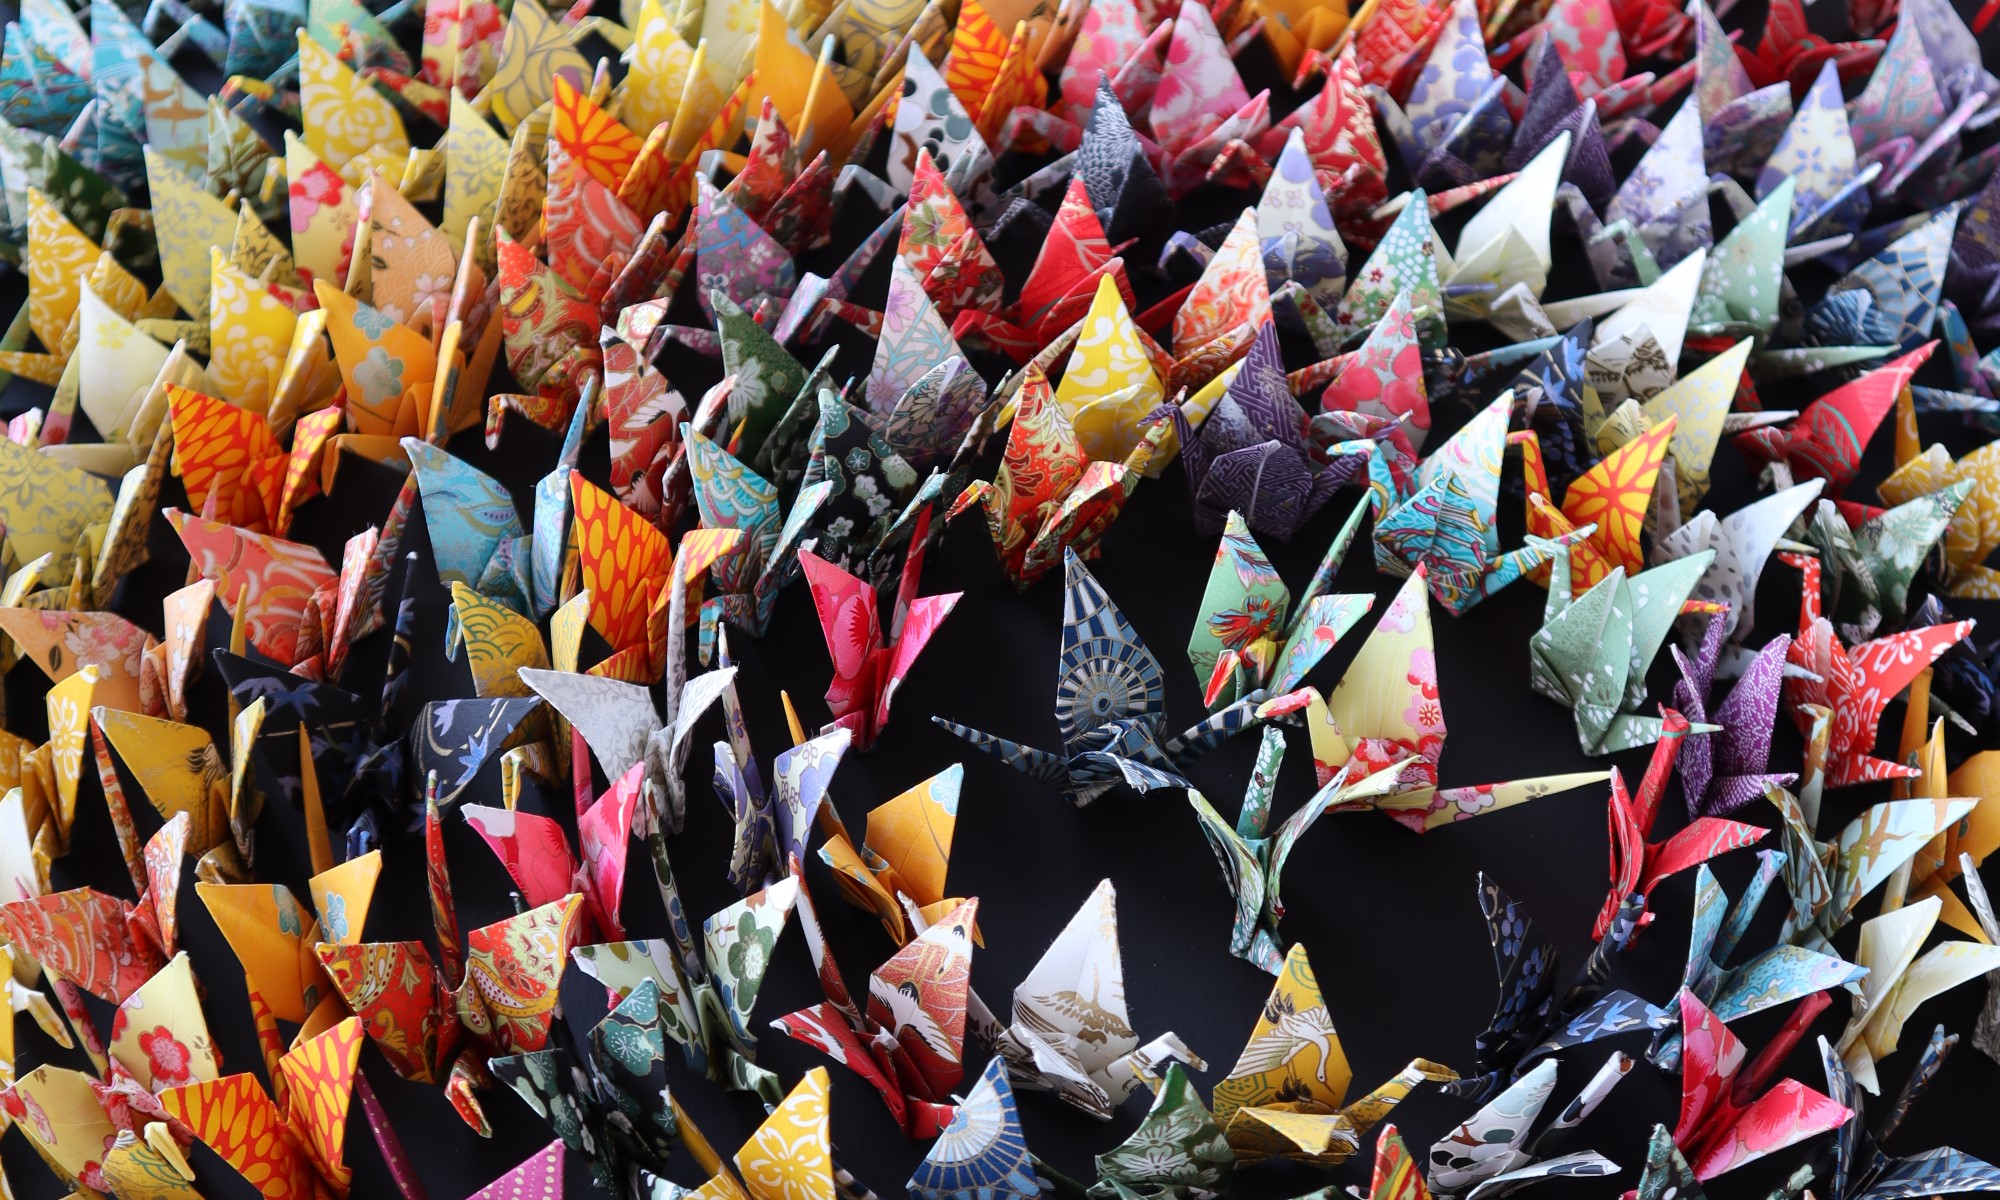 Origami assemblage by Toronto artist Andrew Wang